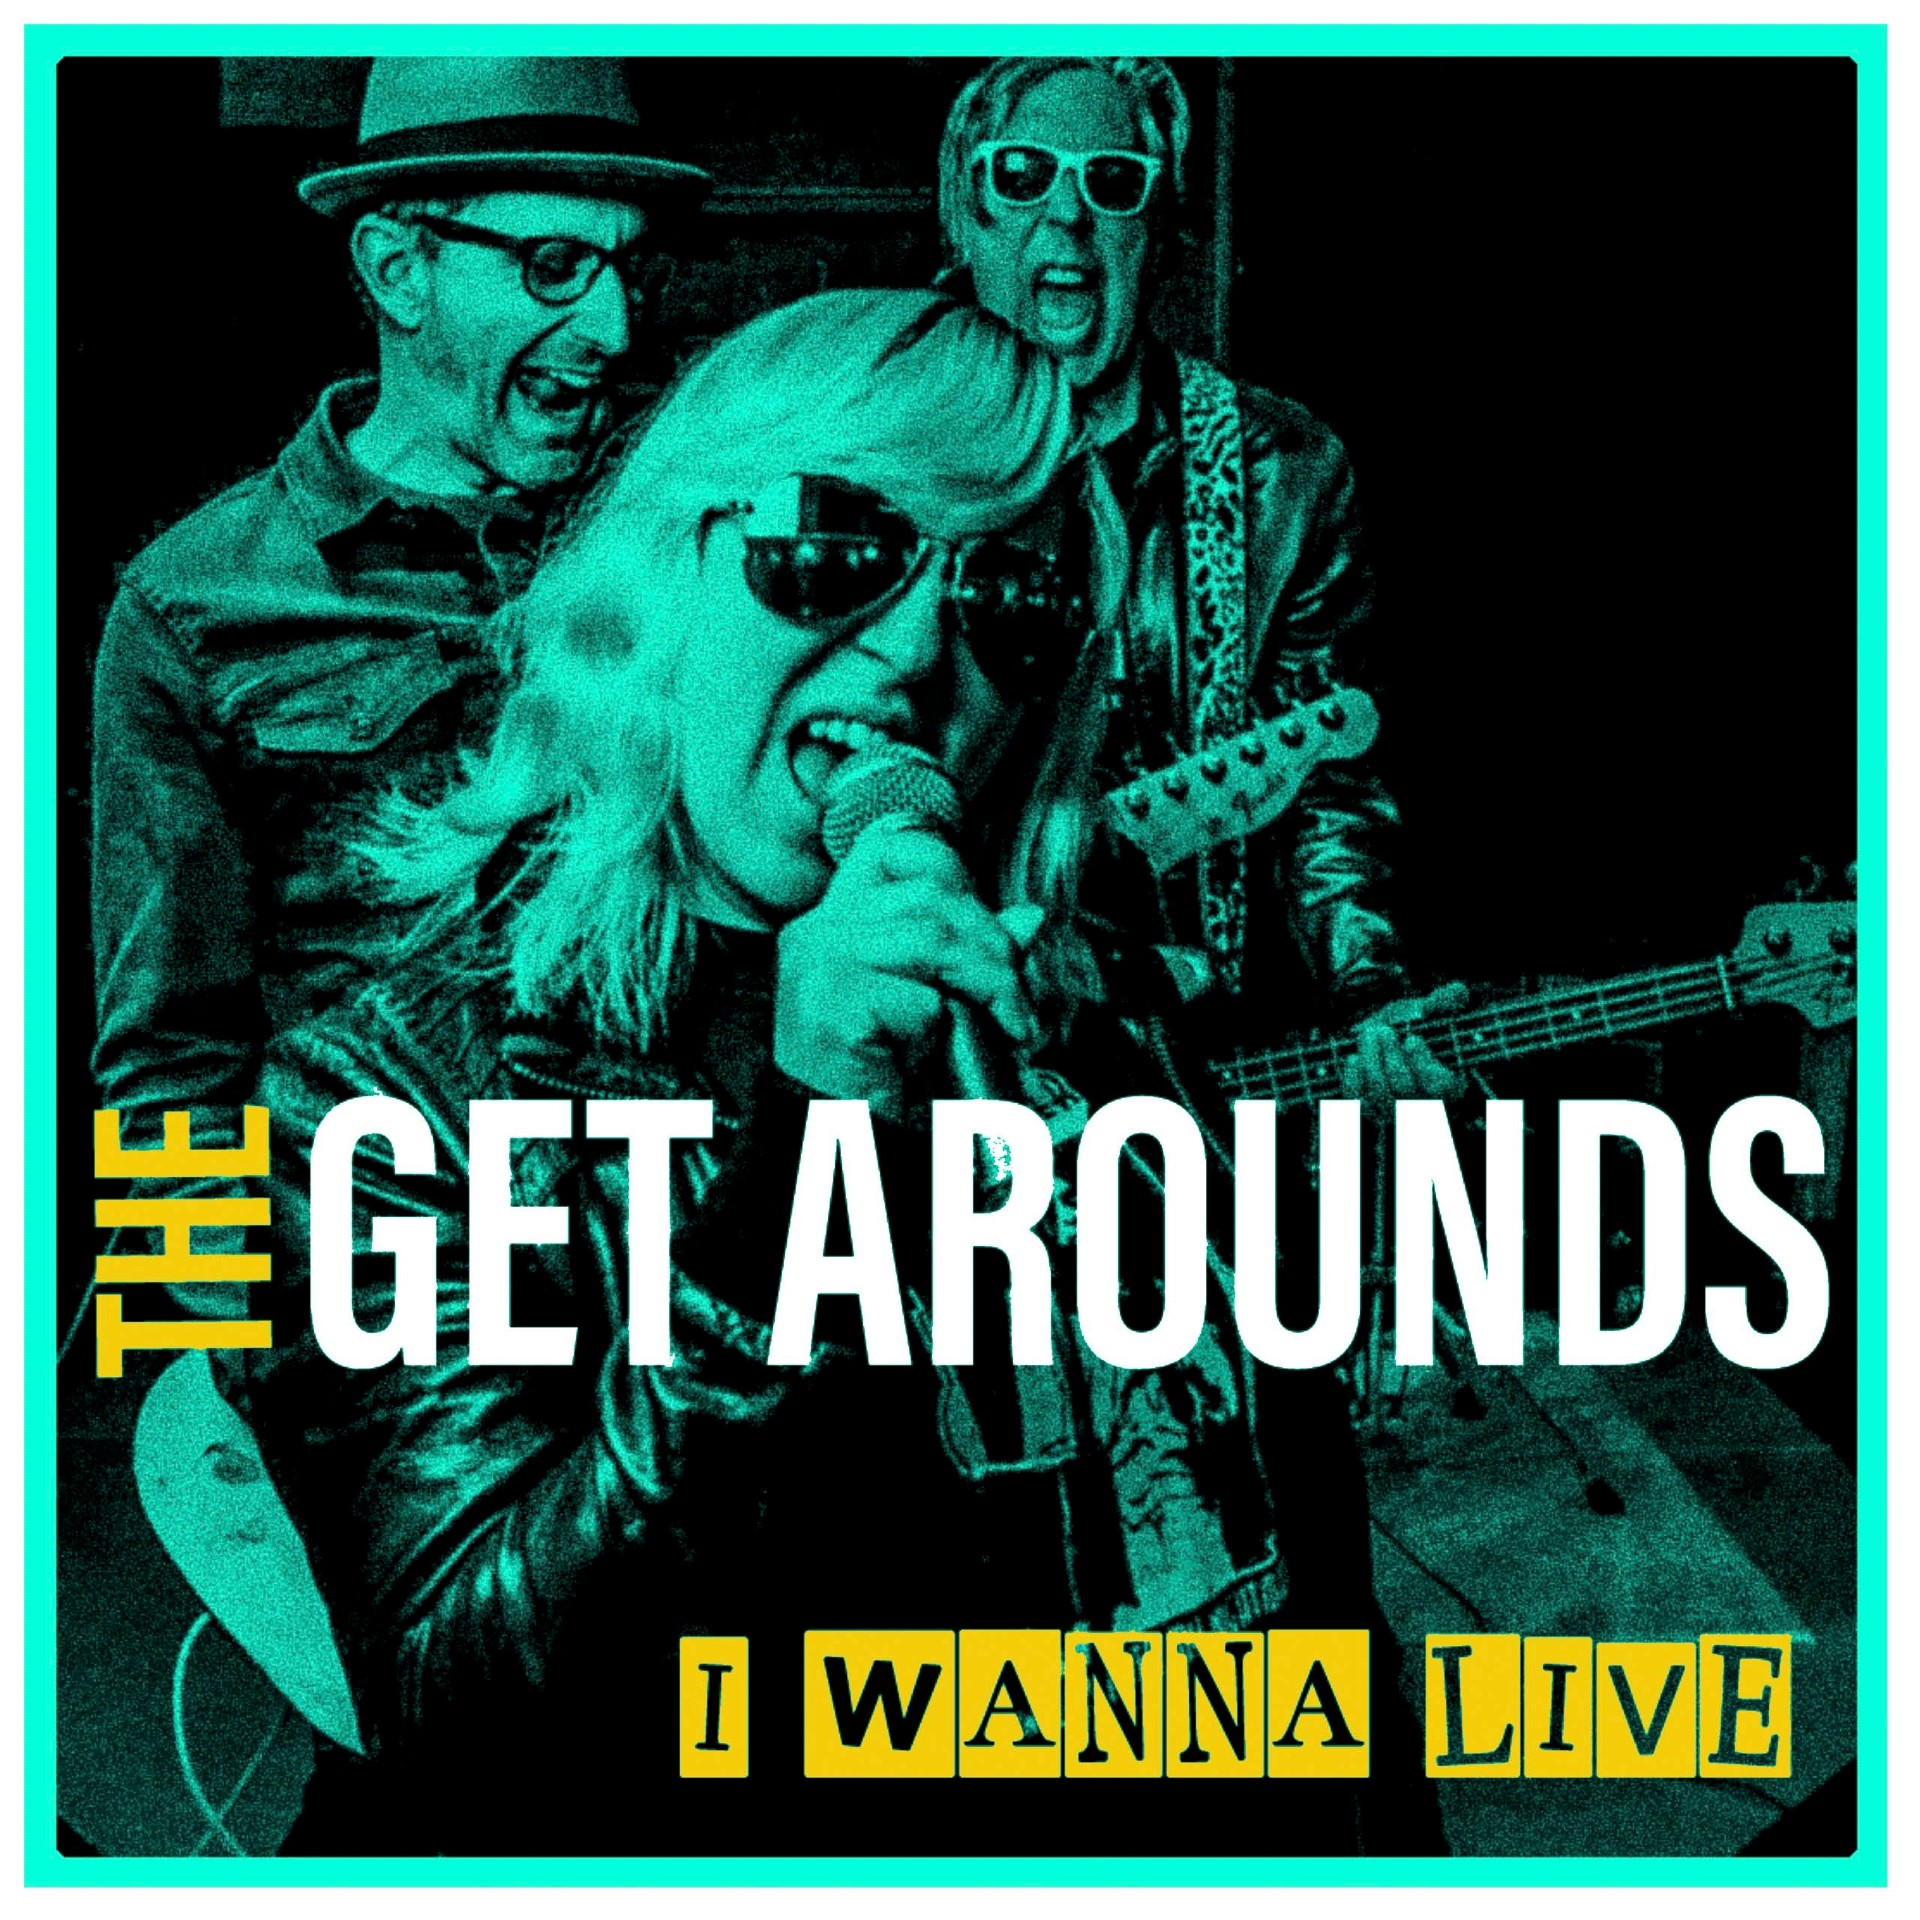 The Get Arounds “Black and White” single artwork